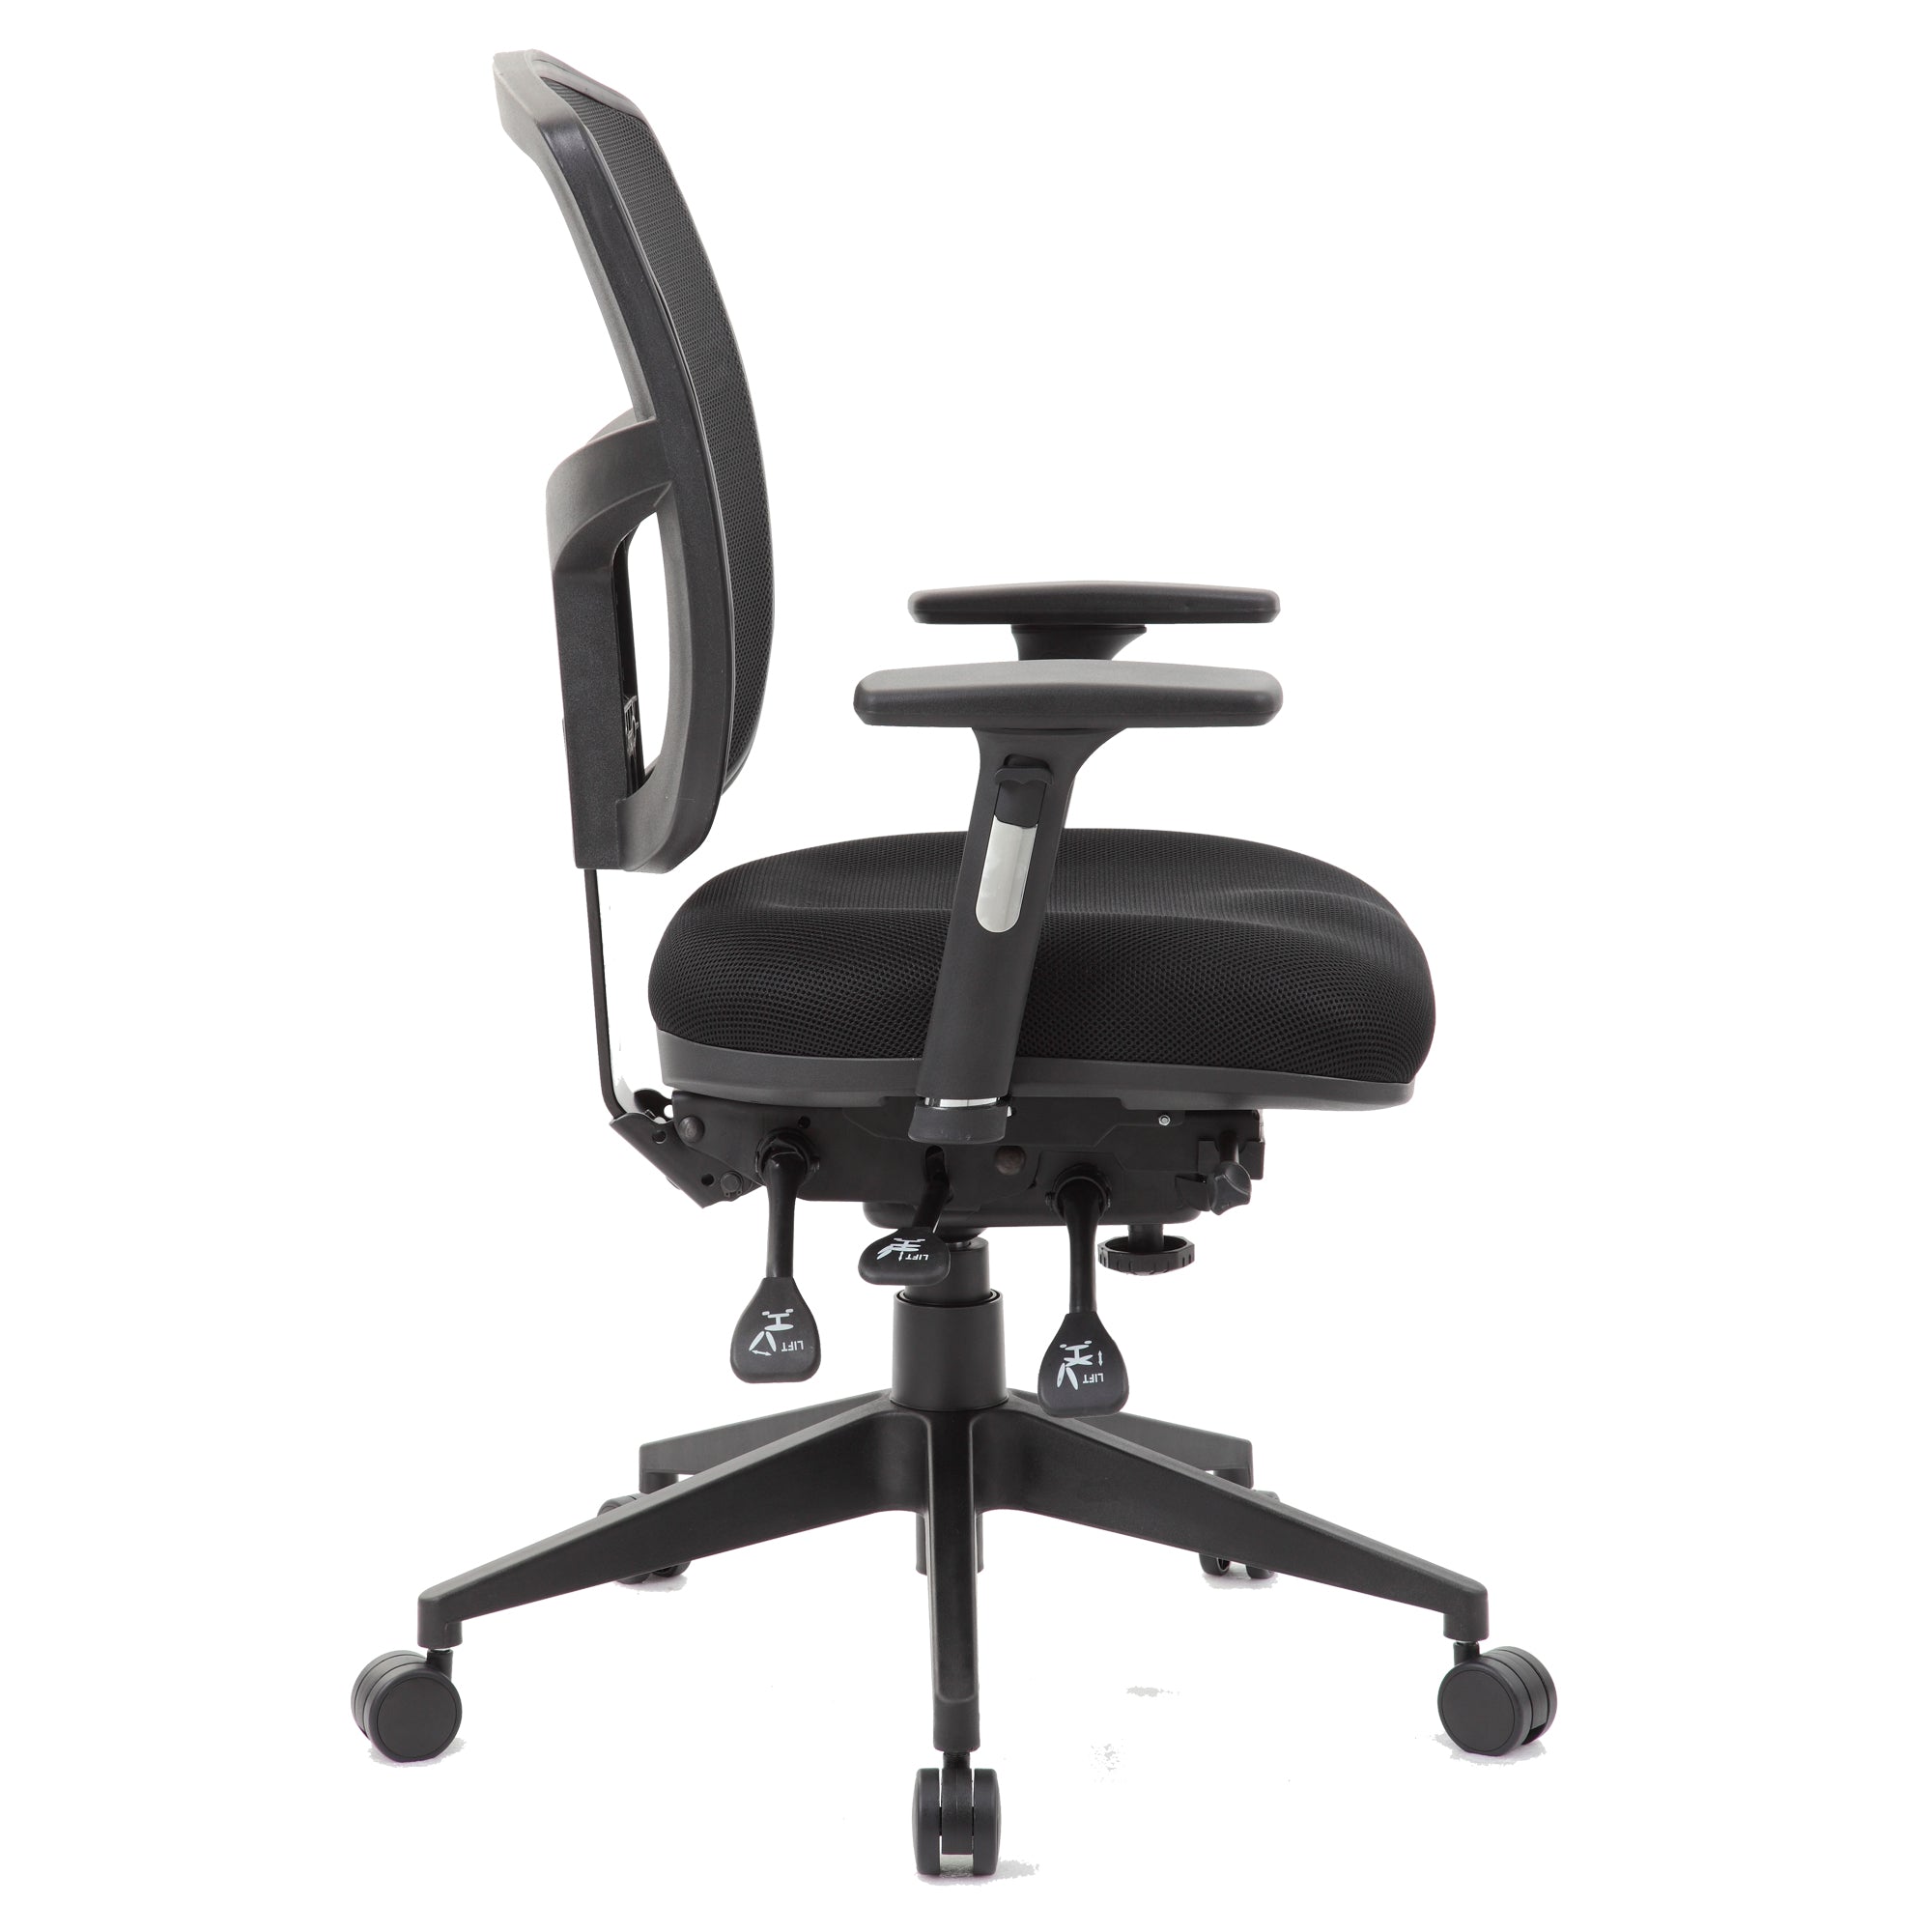 Miami Mesh Back Office Task Chair YS13